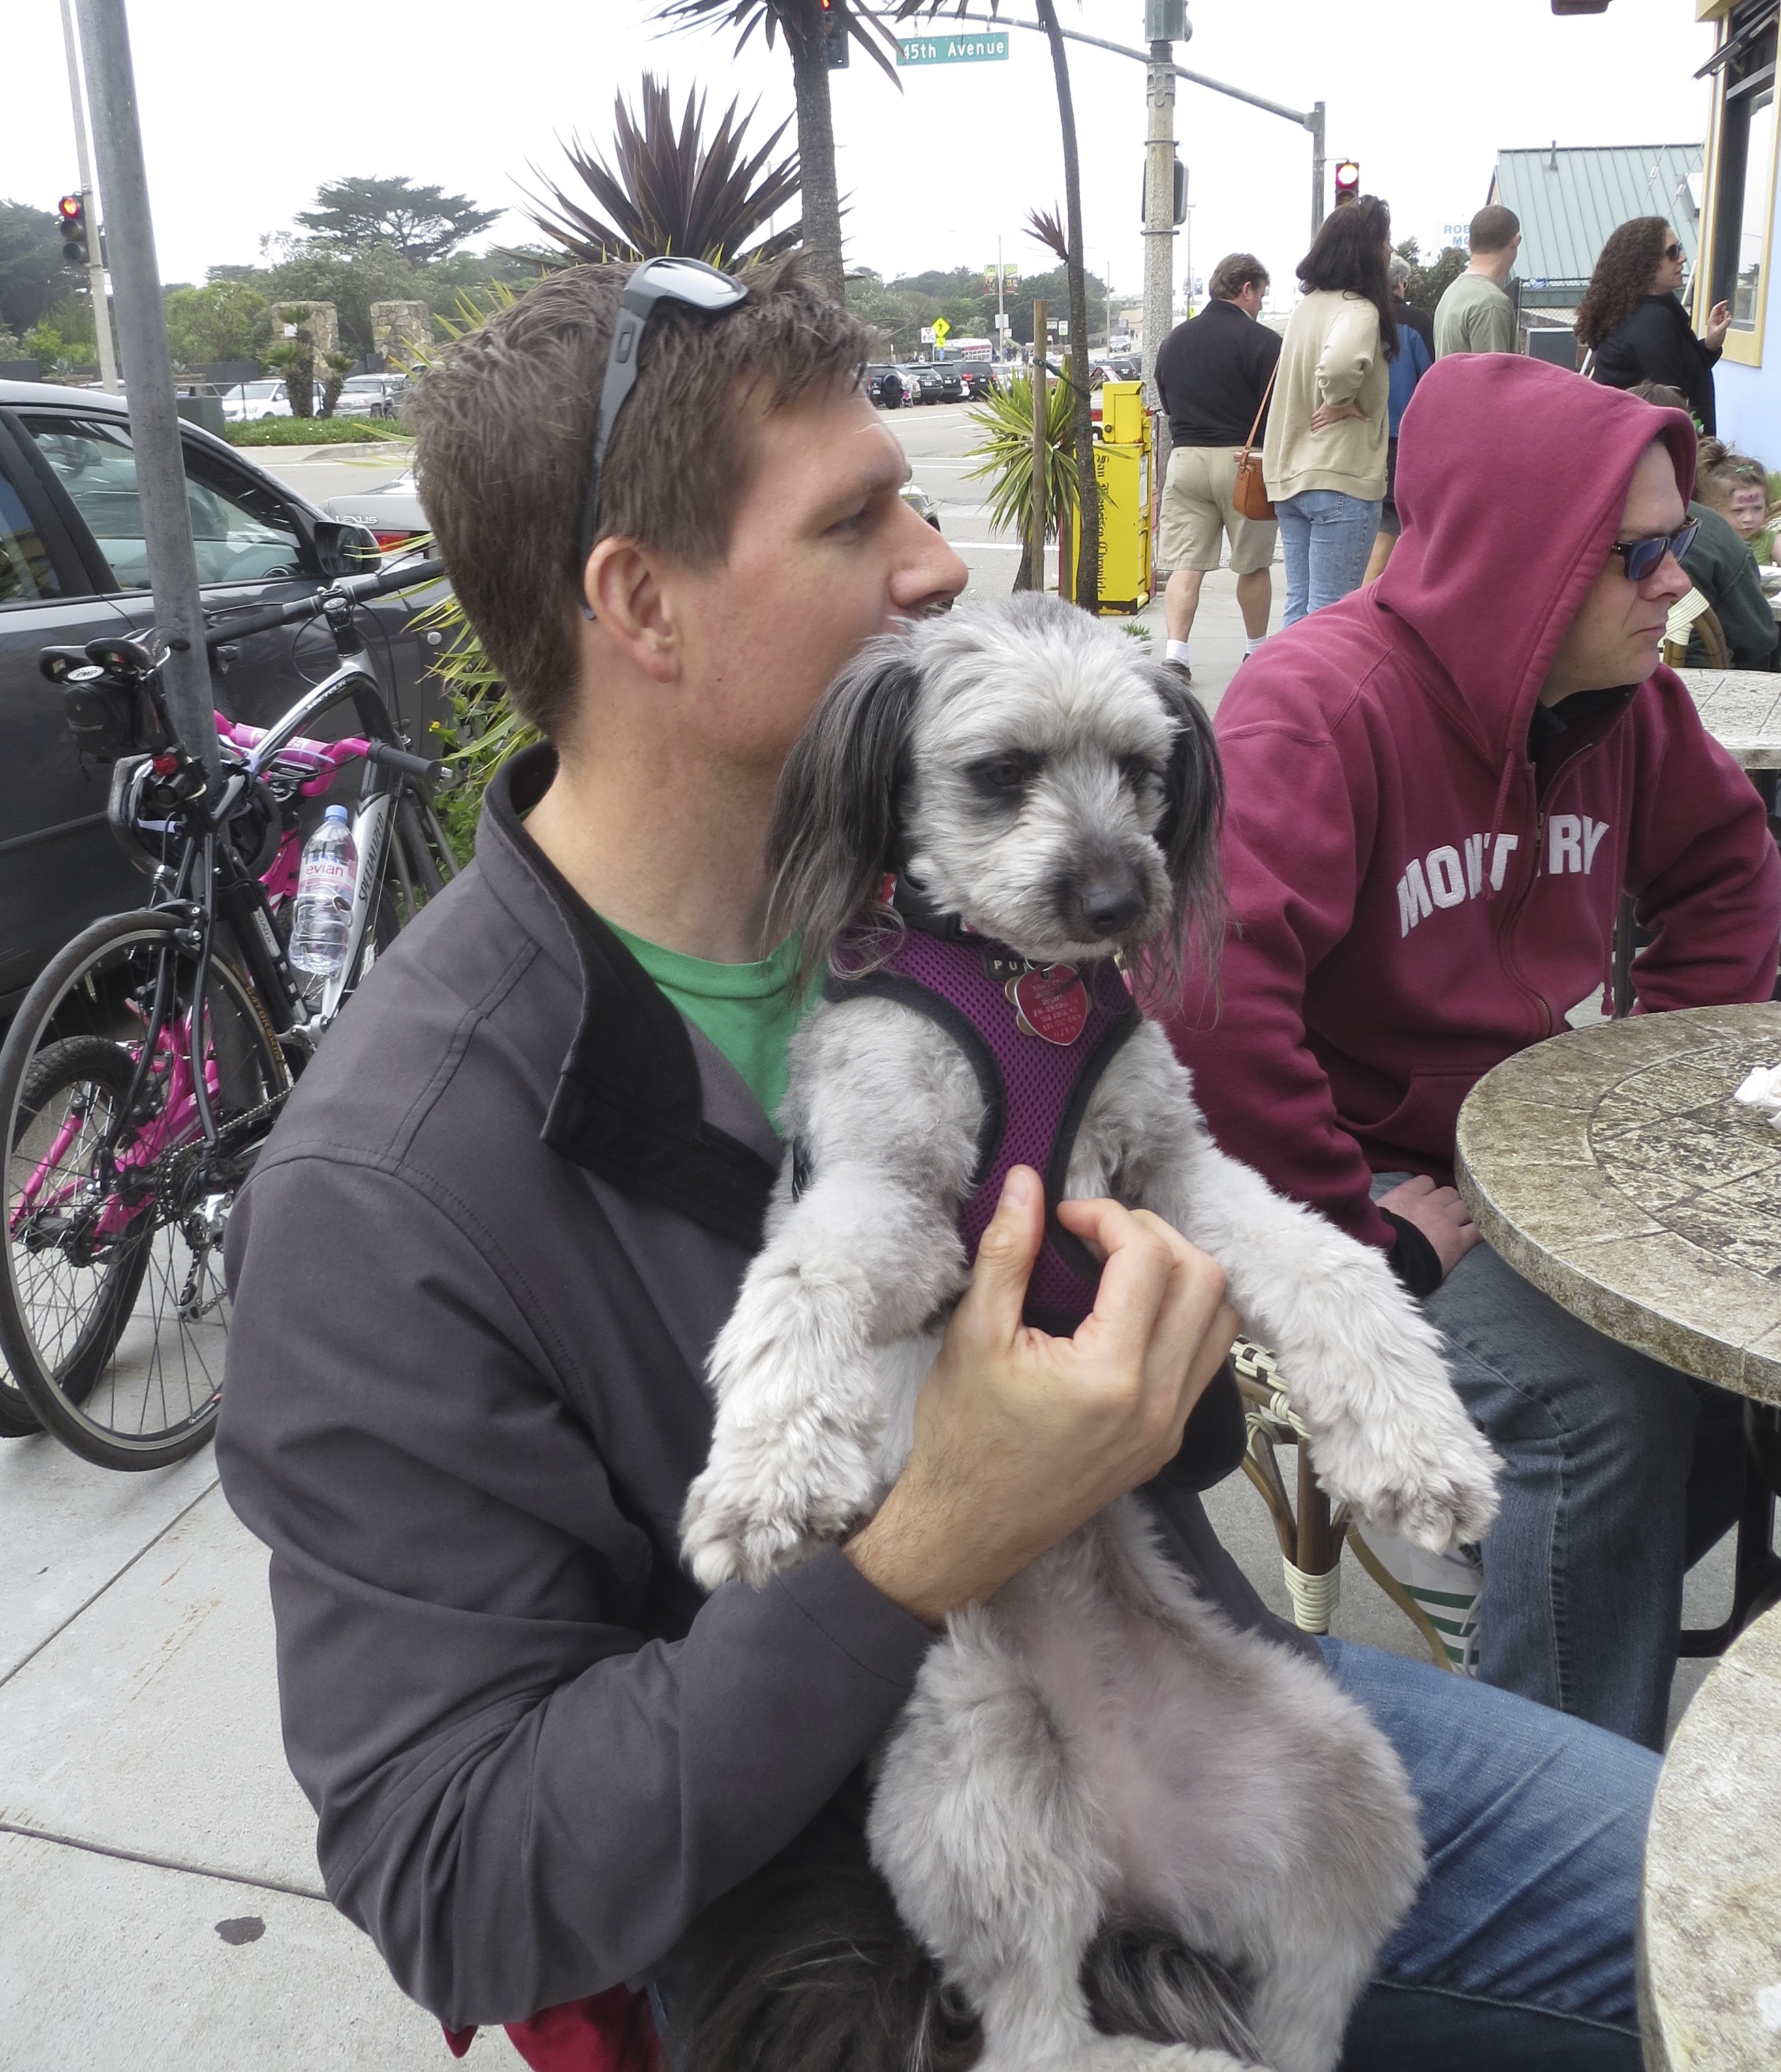 Man With Schnauzer/Poodle Mix In His Lap, Petting Its Chest